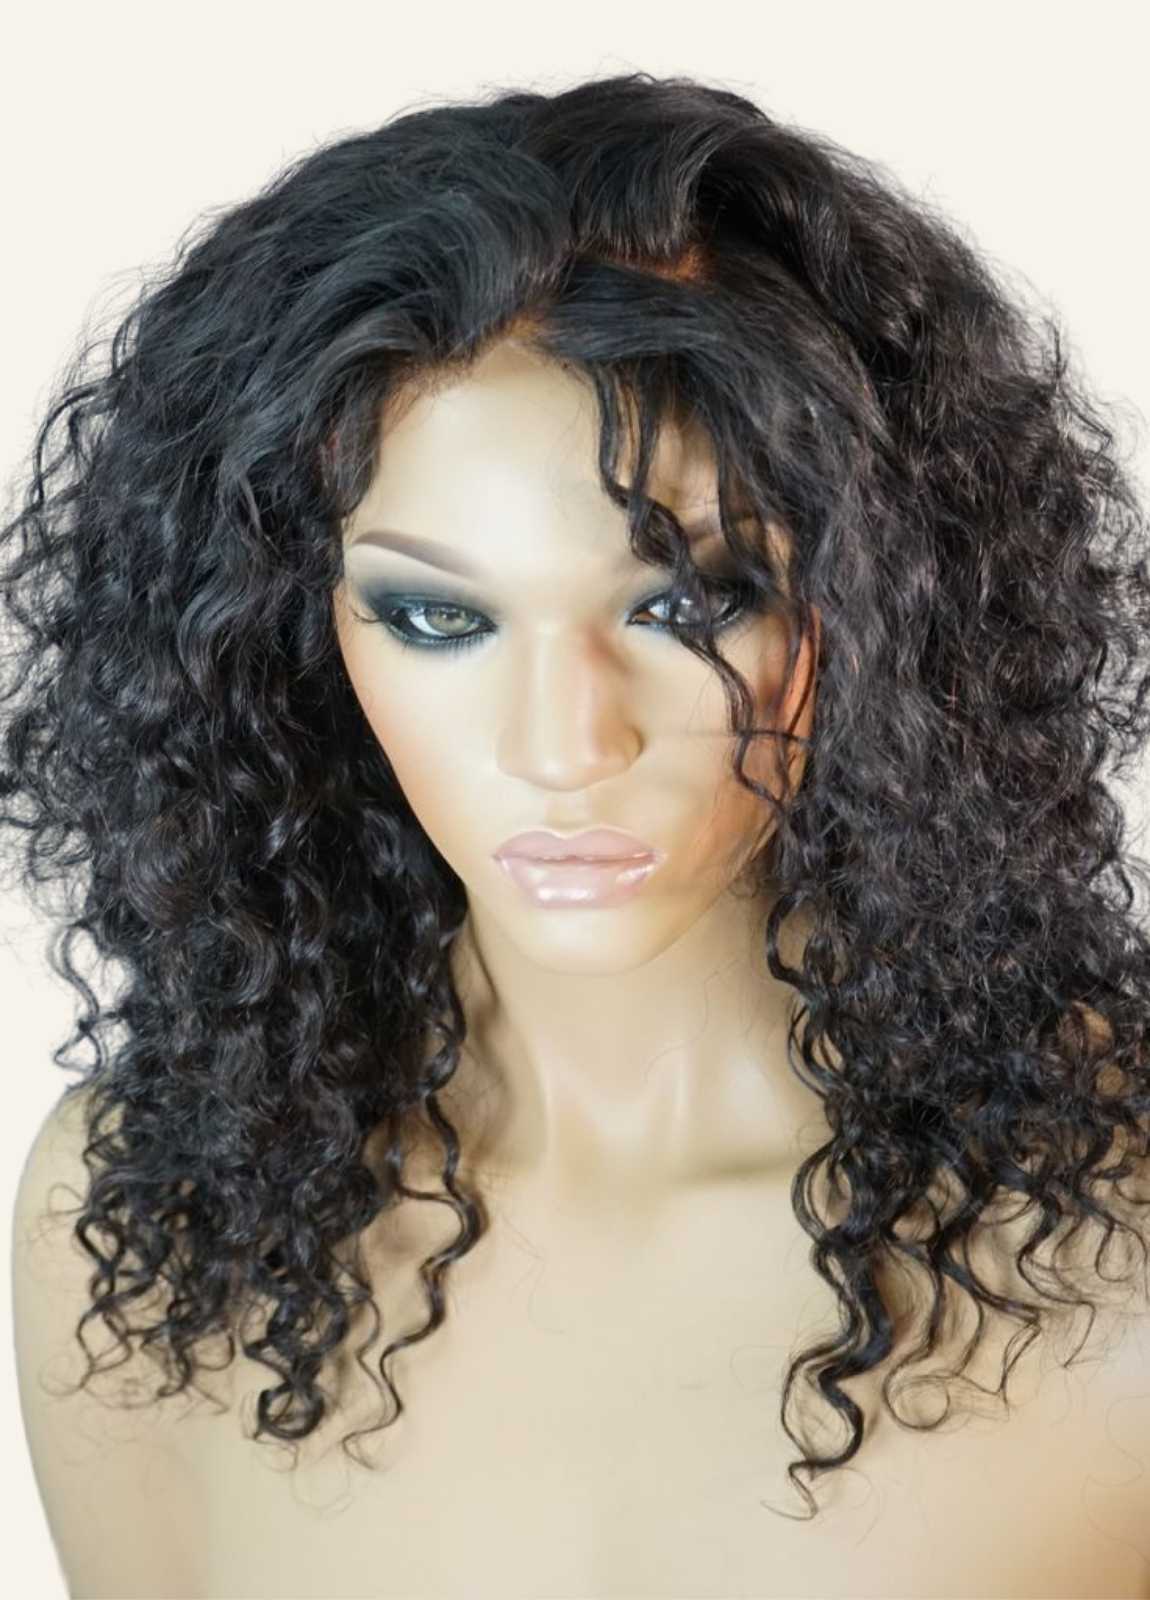 Shoulder Length Curly Human Hair Wigs No Glue wigs with an invisible lace wig cap